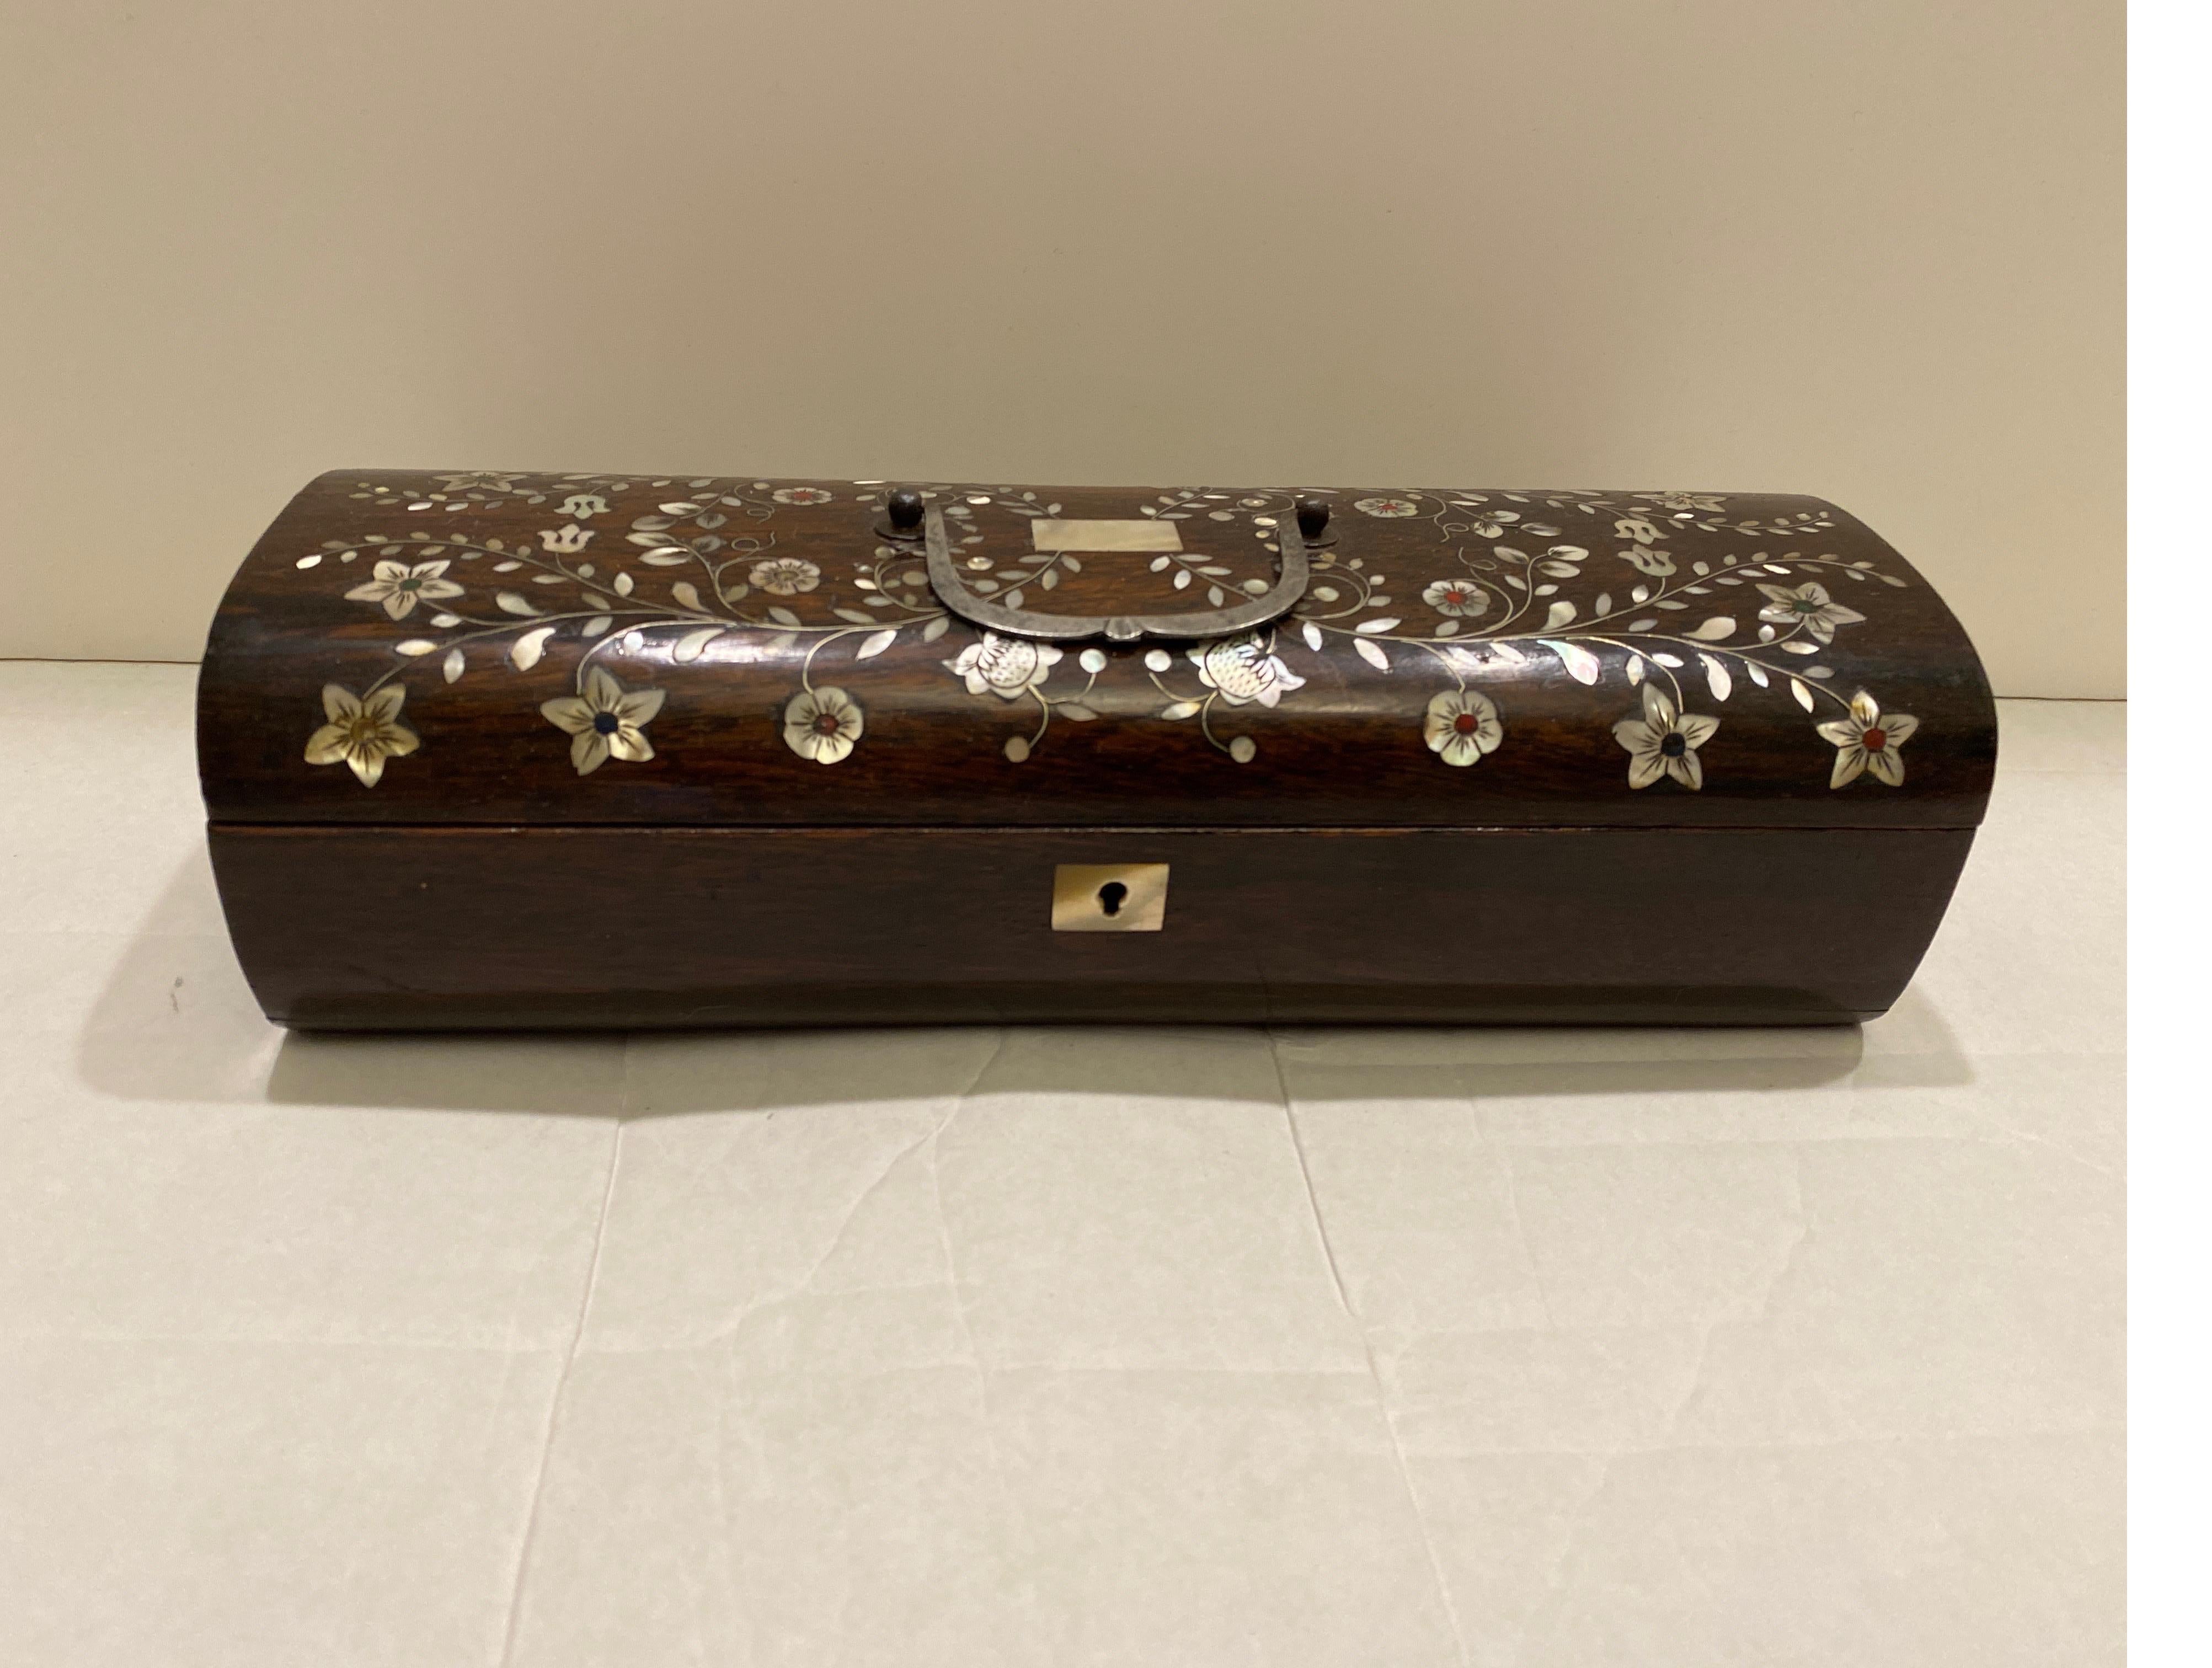 Elegant Anlo-Portuguese rosewood inlaid domed hinged box. The rich warm wood with floral inlays of mother of pearl and silver wire. 9.5 inches wide.